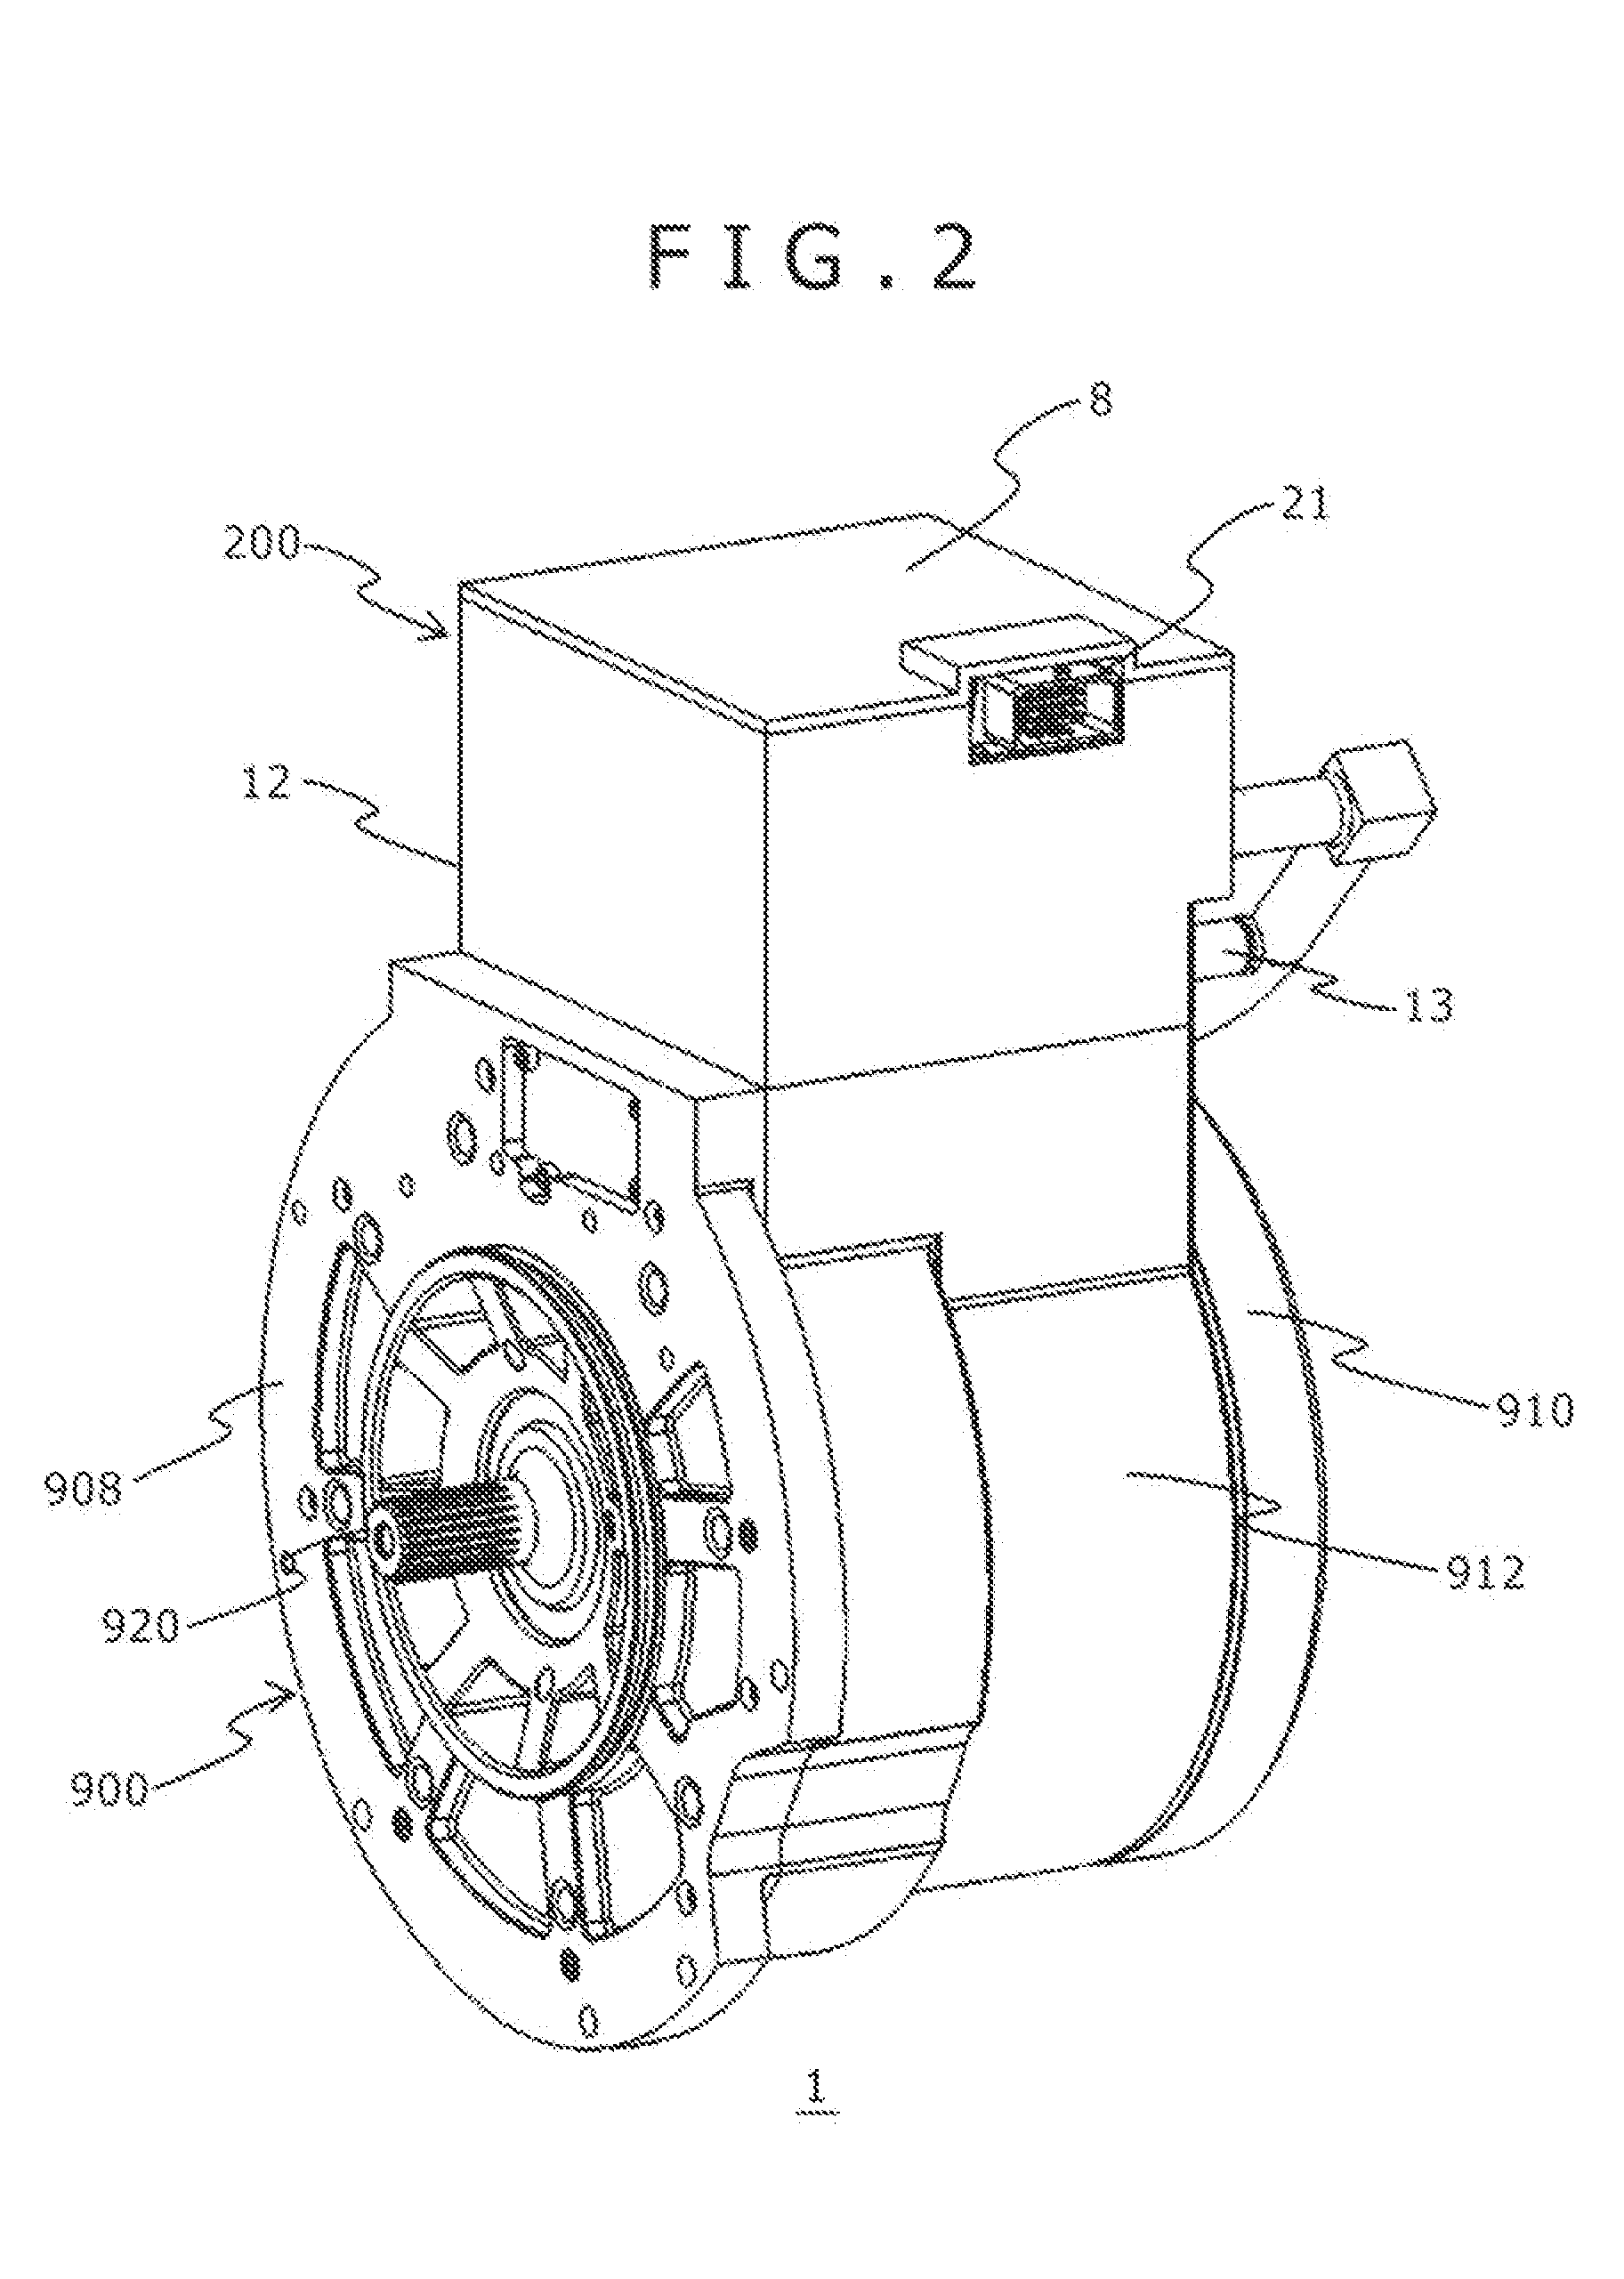 Mechanical-Electrical Integrated Electric Drive System